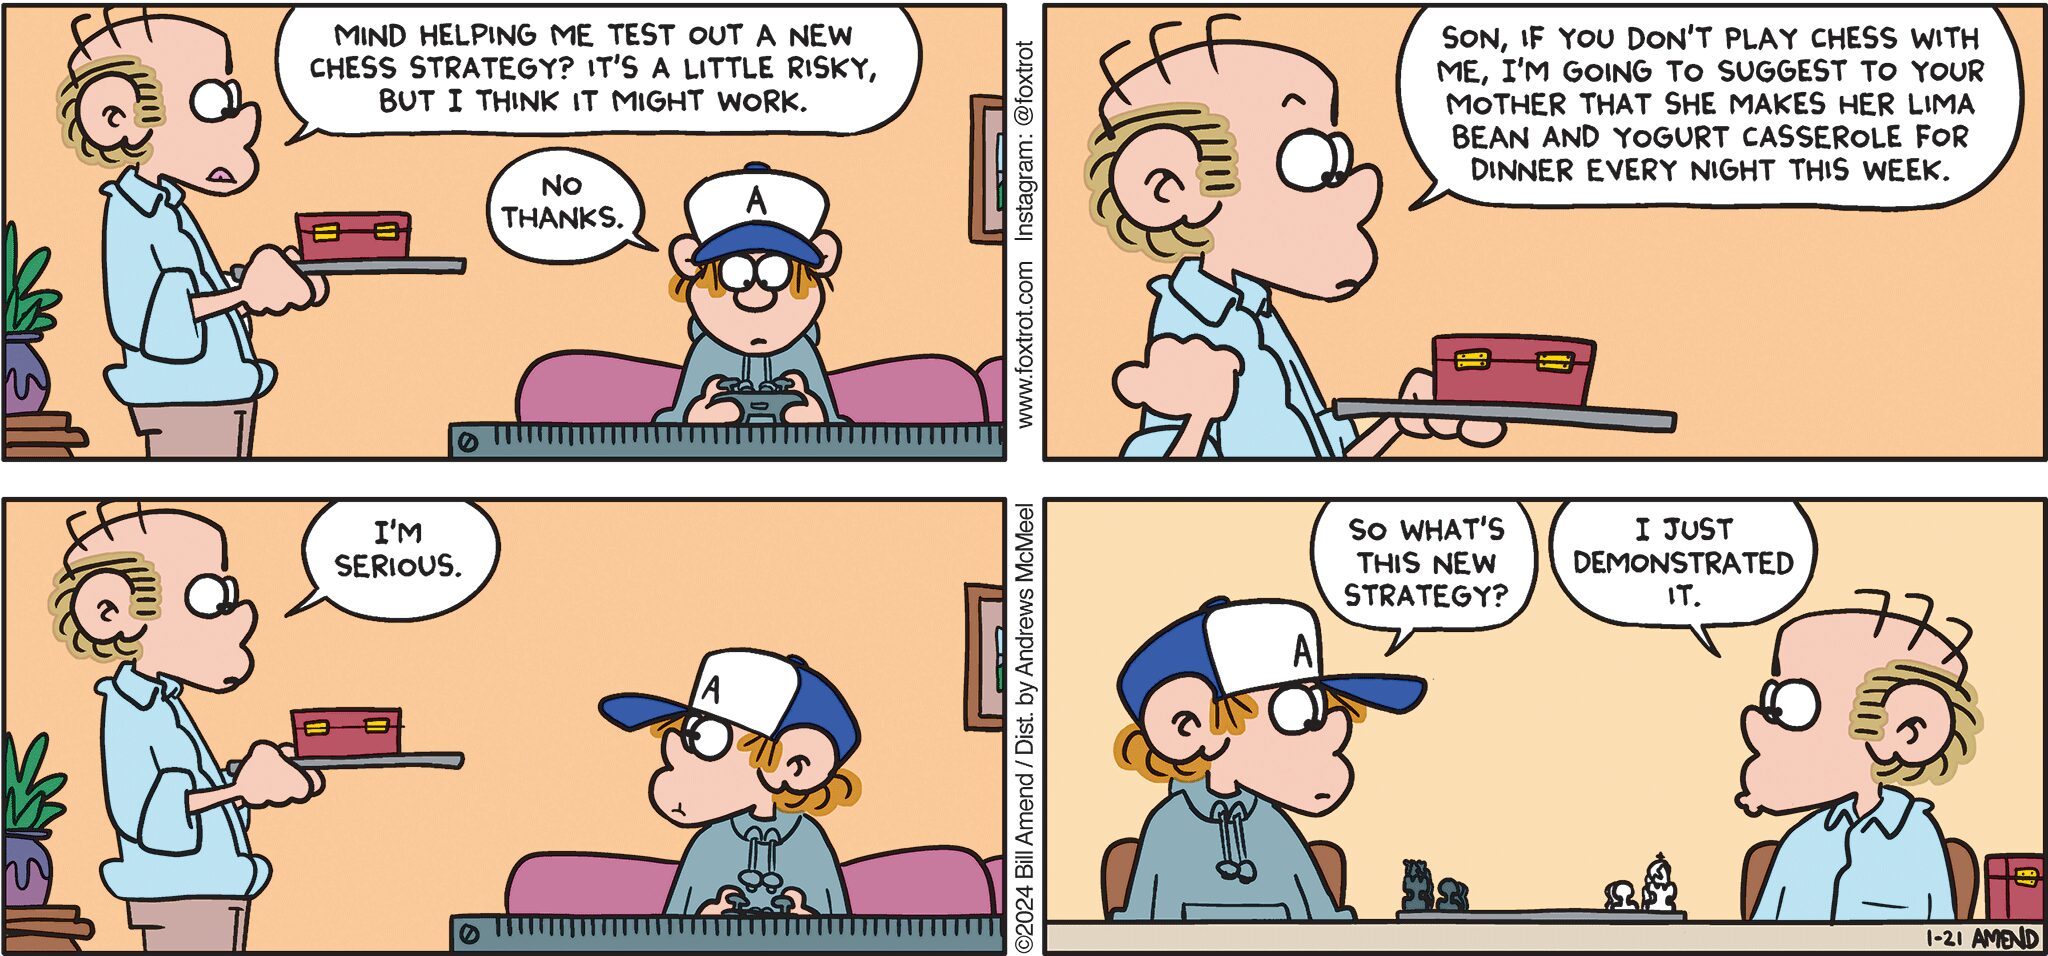 FoxTrot comic strip by Bill Amend - "Chess Strategy" published January 21, 2024 - Transcript: Roger Fox: Mind helping me test out a new chess strategy? It's a little risky, but I think it might work. Peter Fox: No thanks. Roger Fox: Son, if you don't play chess with me, I'm going to suggest to your mother that she makes her lima bean and yogurt casserole for dinner every night this week. I'm serious. Peter Fox: So what's the new strategy? Roger Fox: I just demonstrated it.